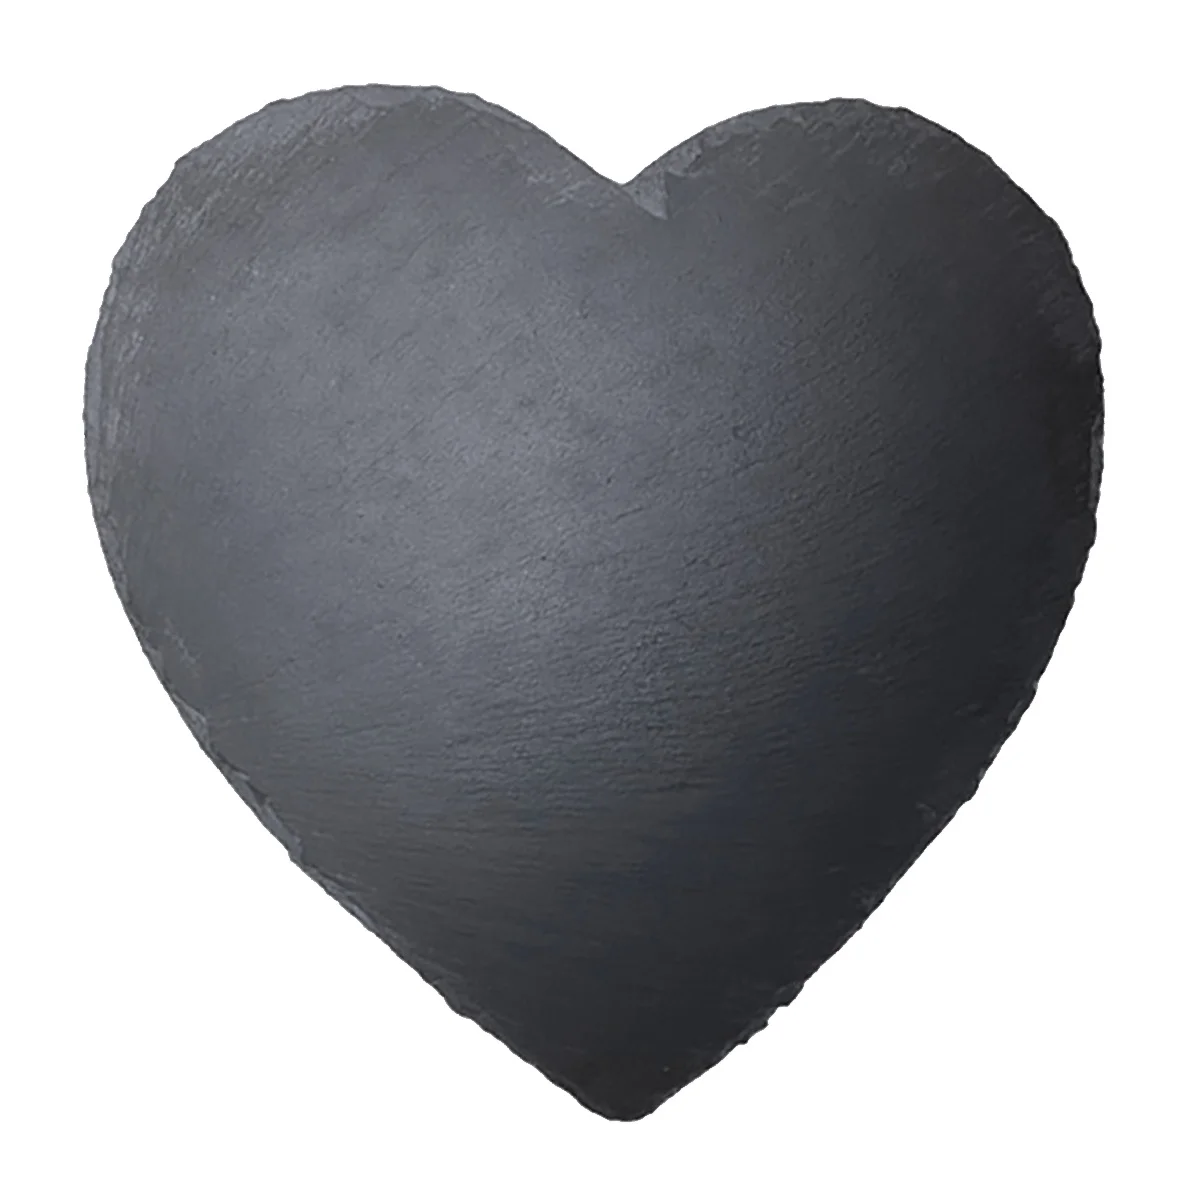 

Heart Shaped Slate Cheese Boards Steak Board Tray Stone Wedding Valentines Day Serving Platter for Cheese Meat Appetizers Dried